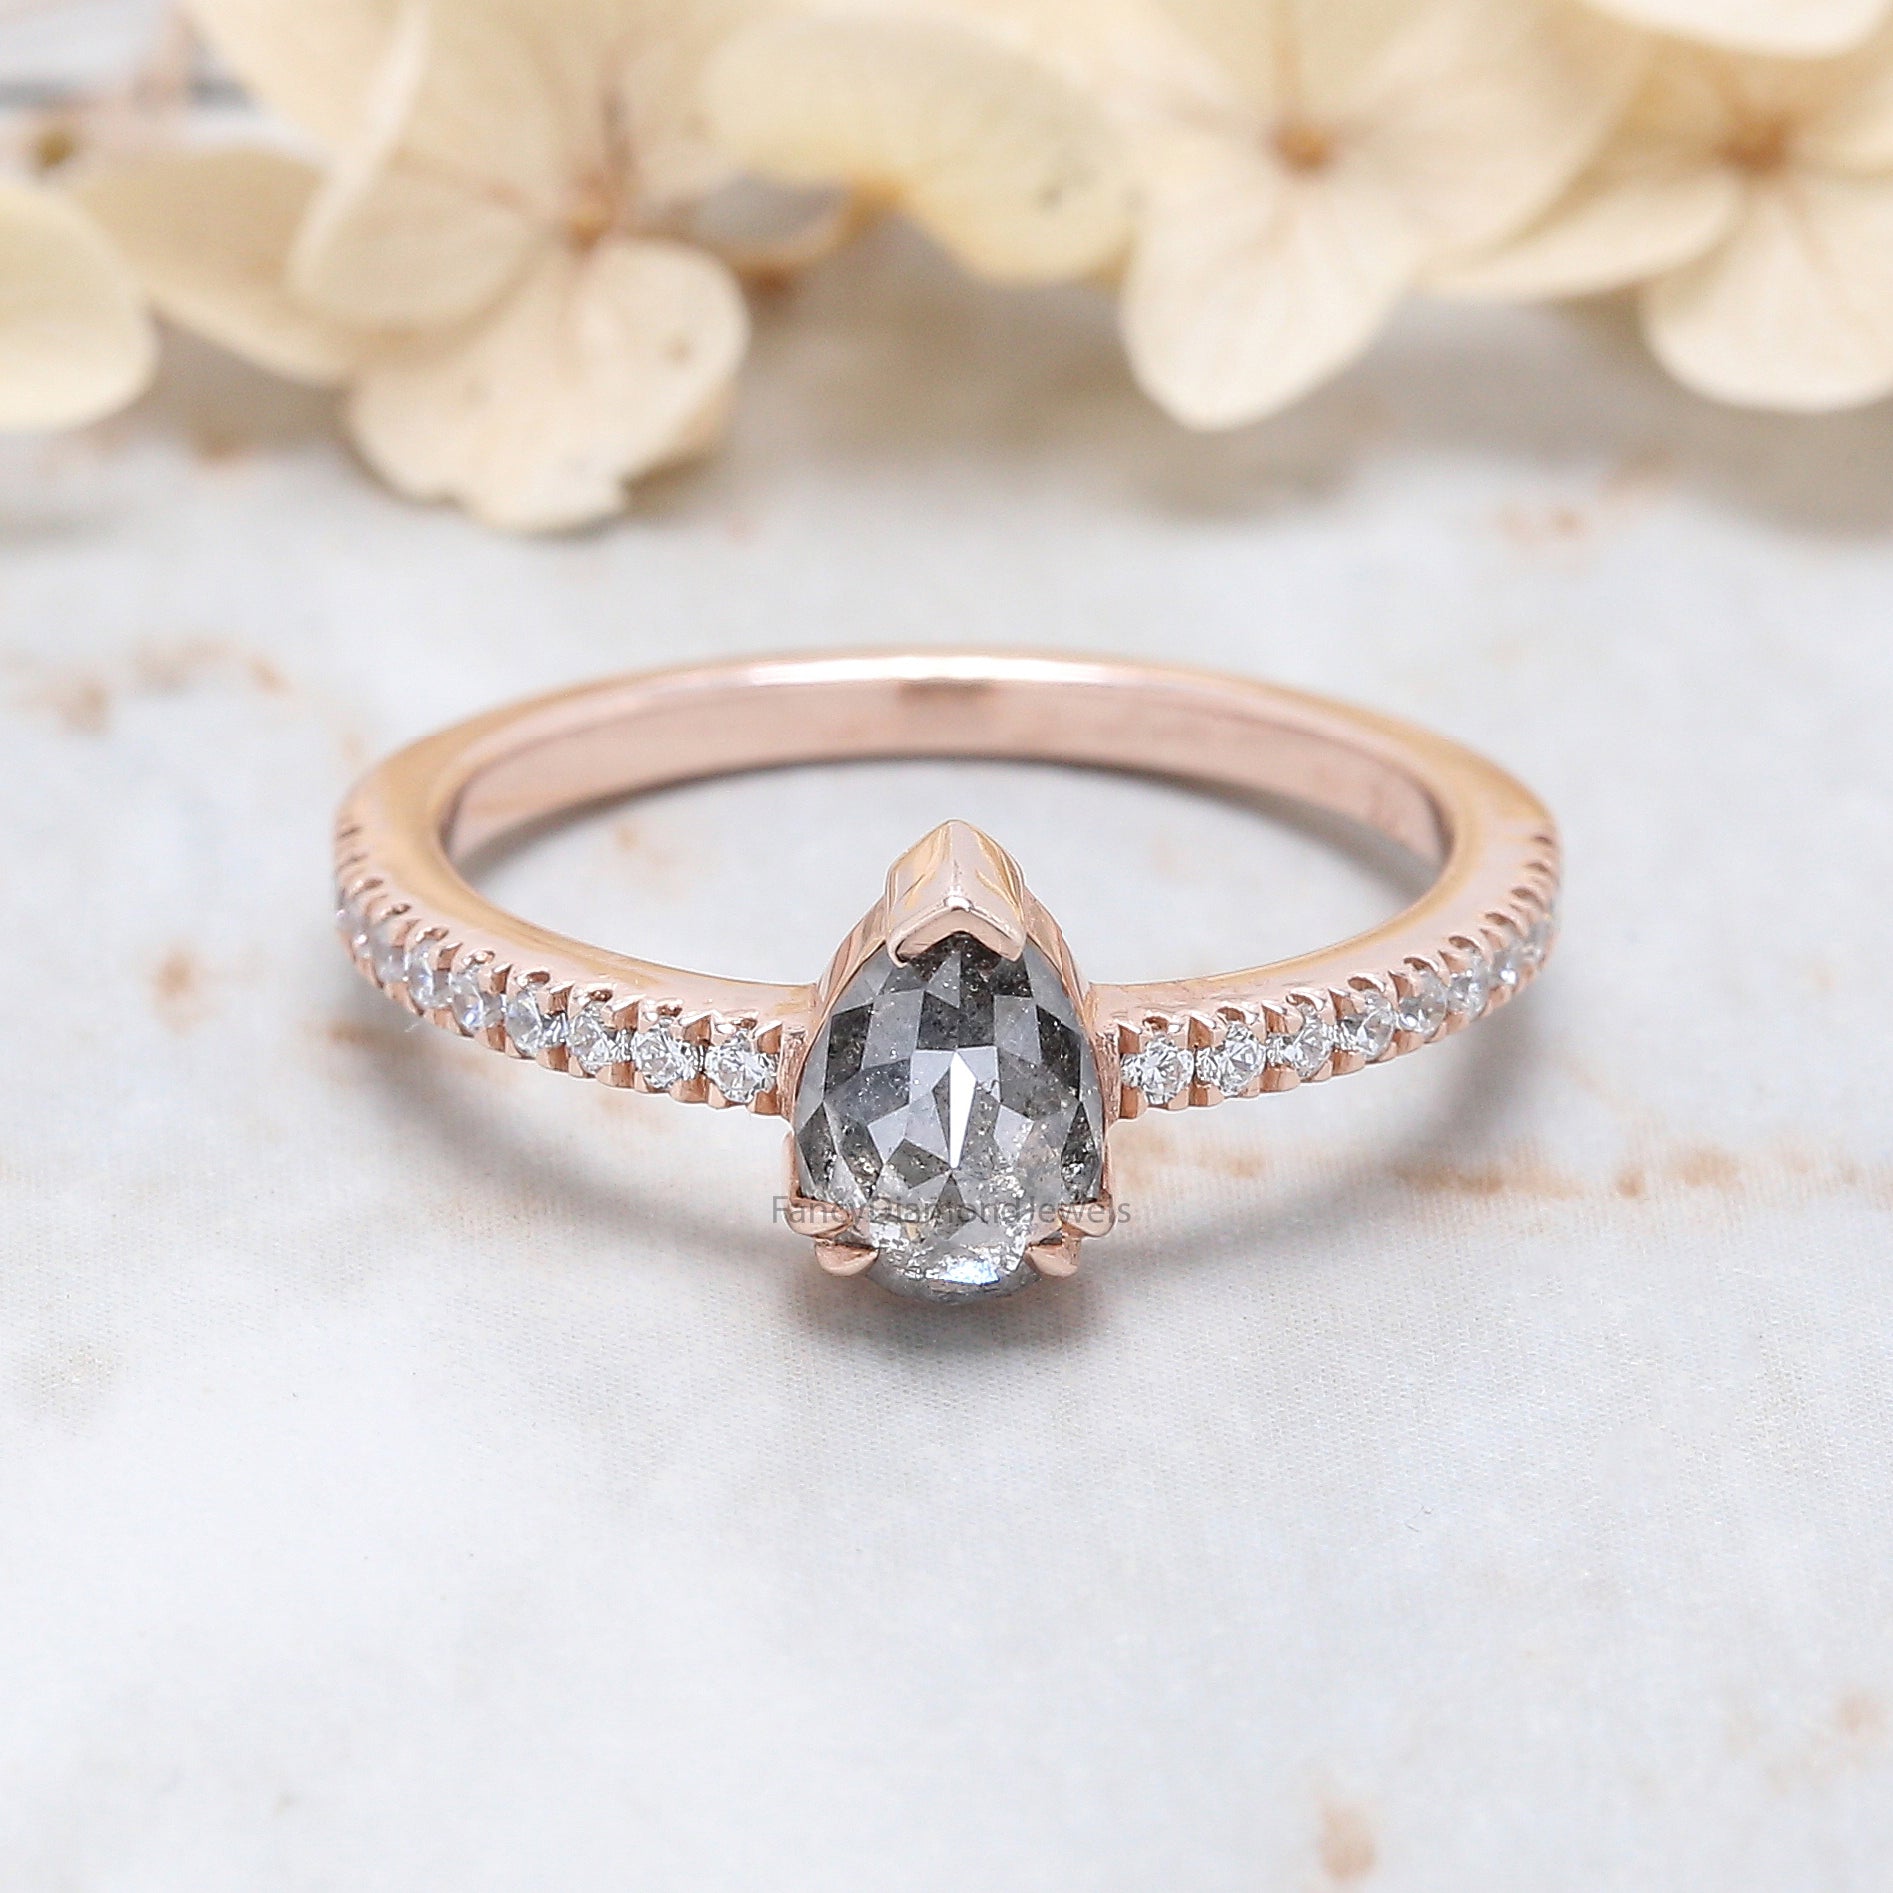 Pear Cut Salt And Pepper Diamond Ring 0.90 Ct 6.90 MM Pear Diamond Ring 14K Solid Rose Gold Silver Pear Engagement Ring Gift For Her QN9638